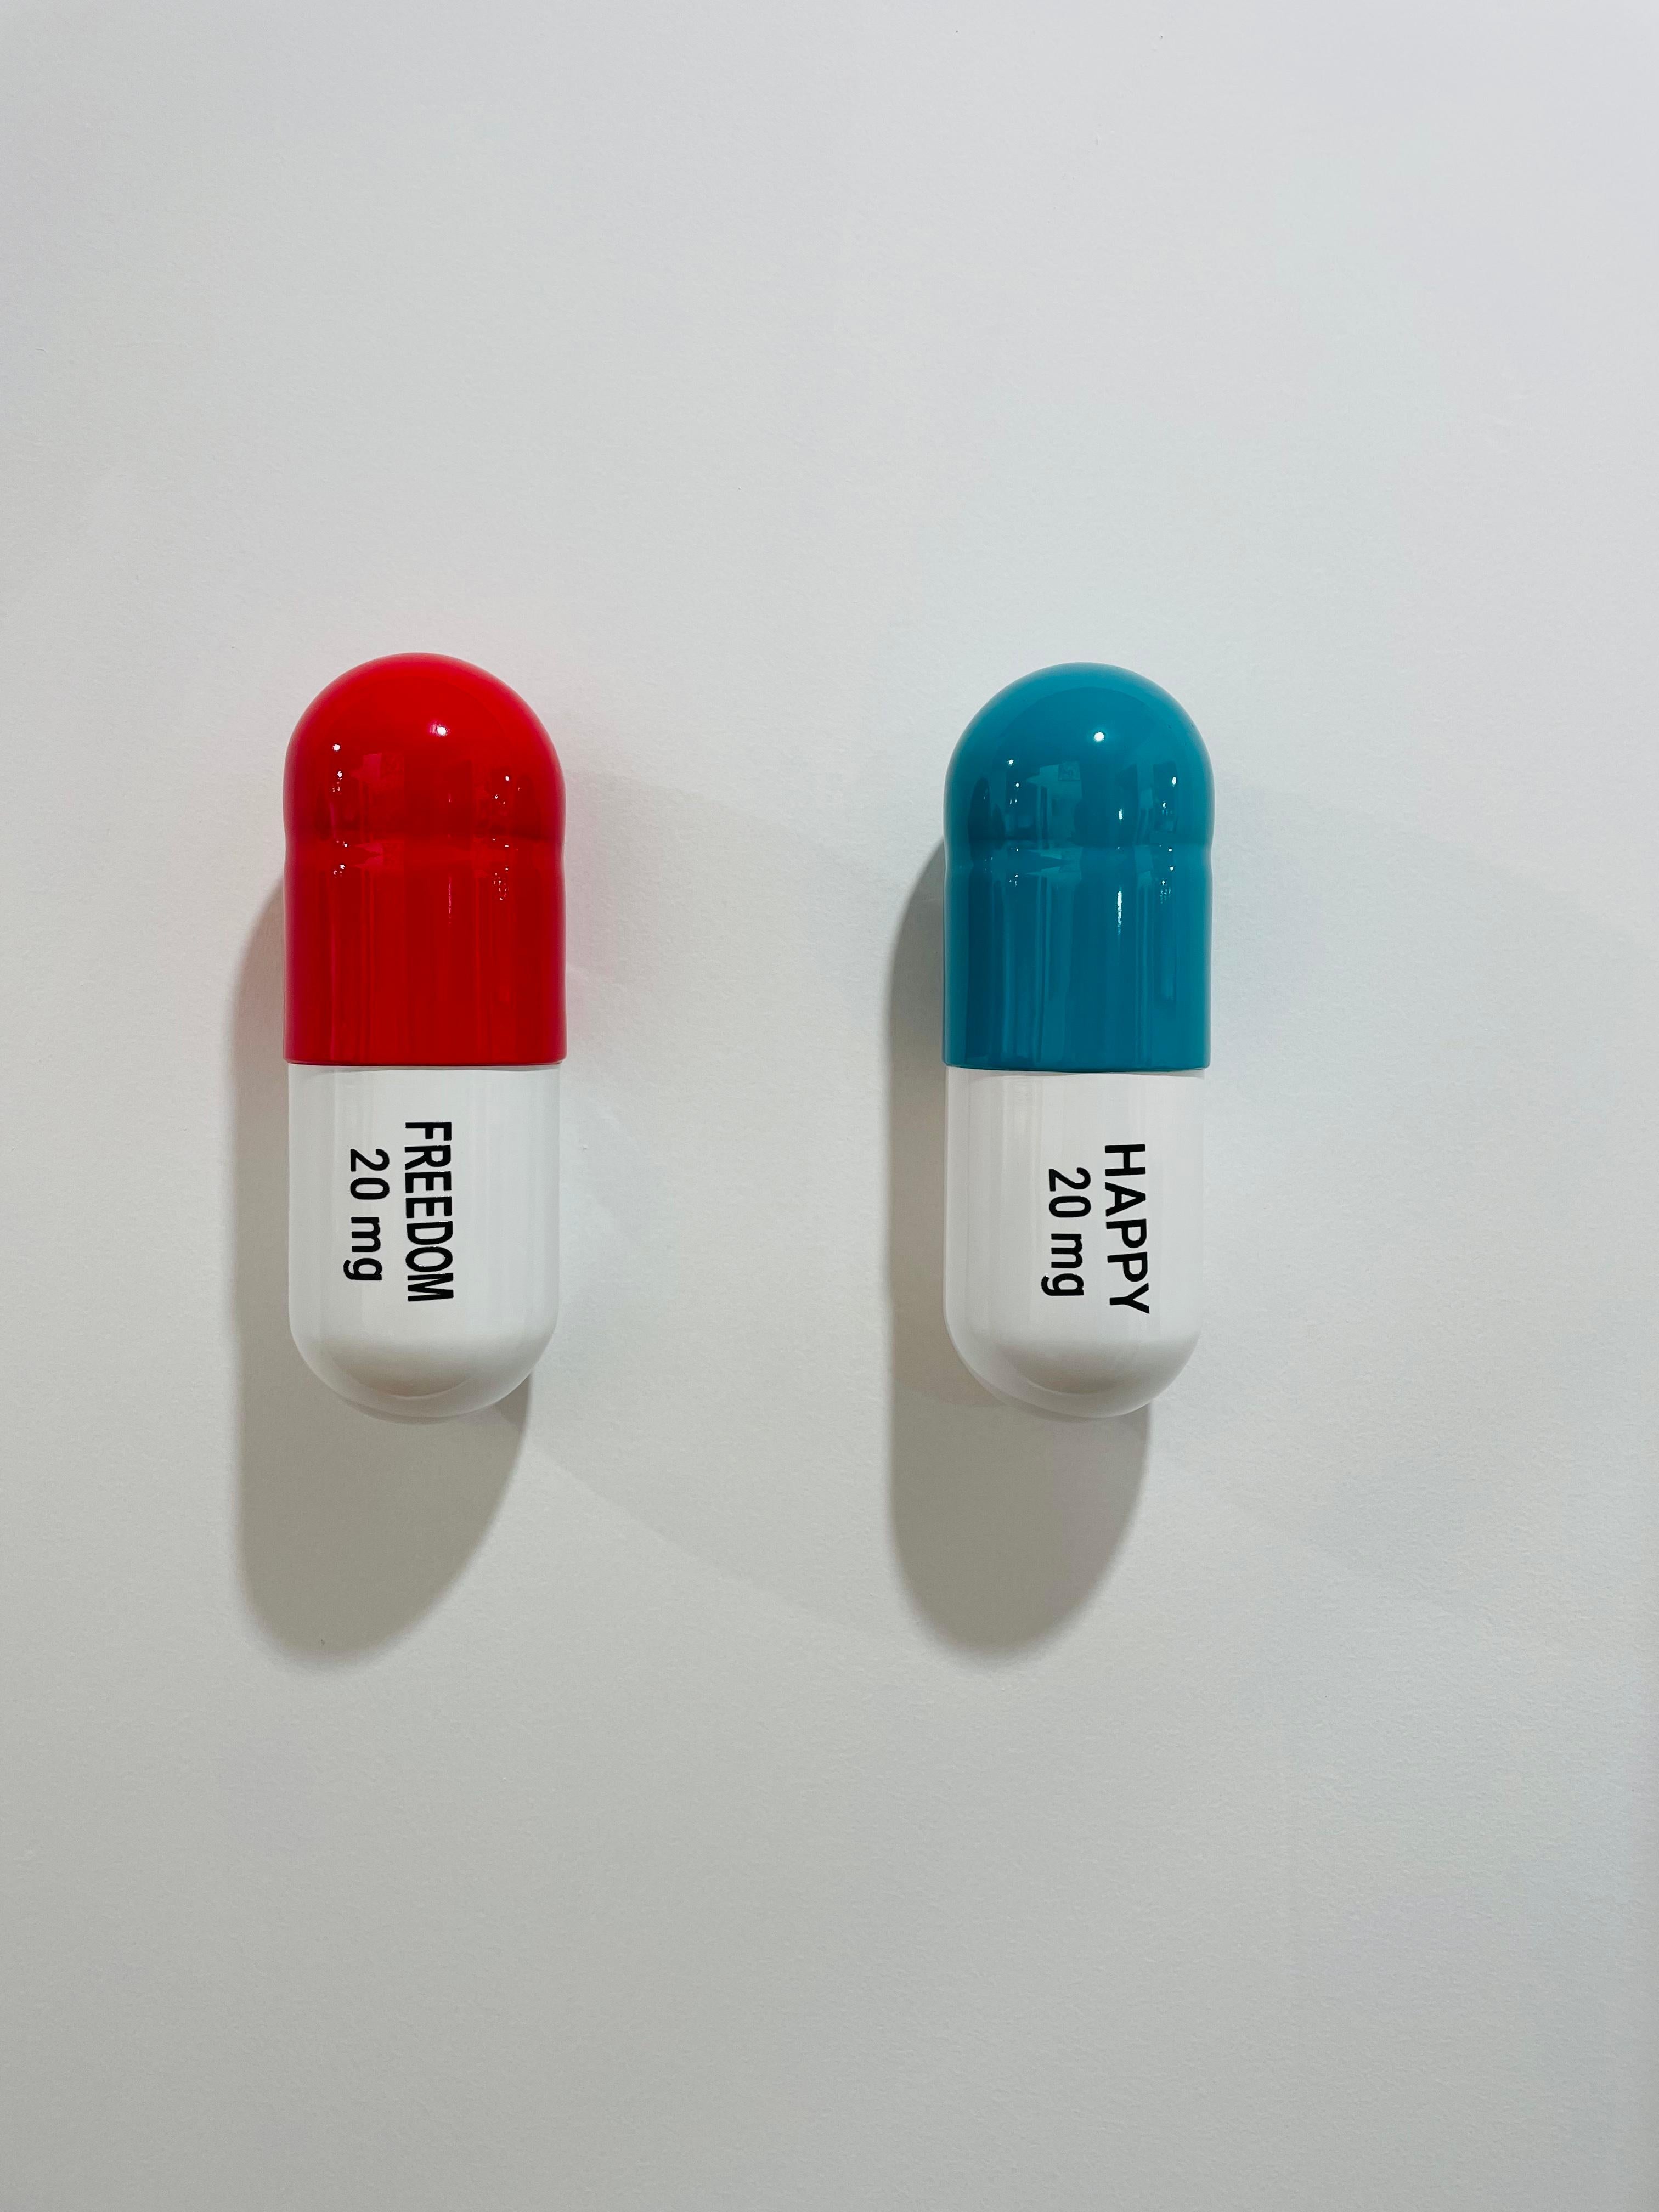 Tal Nehoray Figurative Sculpture - 20 ML Happy freedom pill Combo (red, turquoise, white) - figurative sculpture